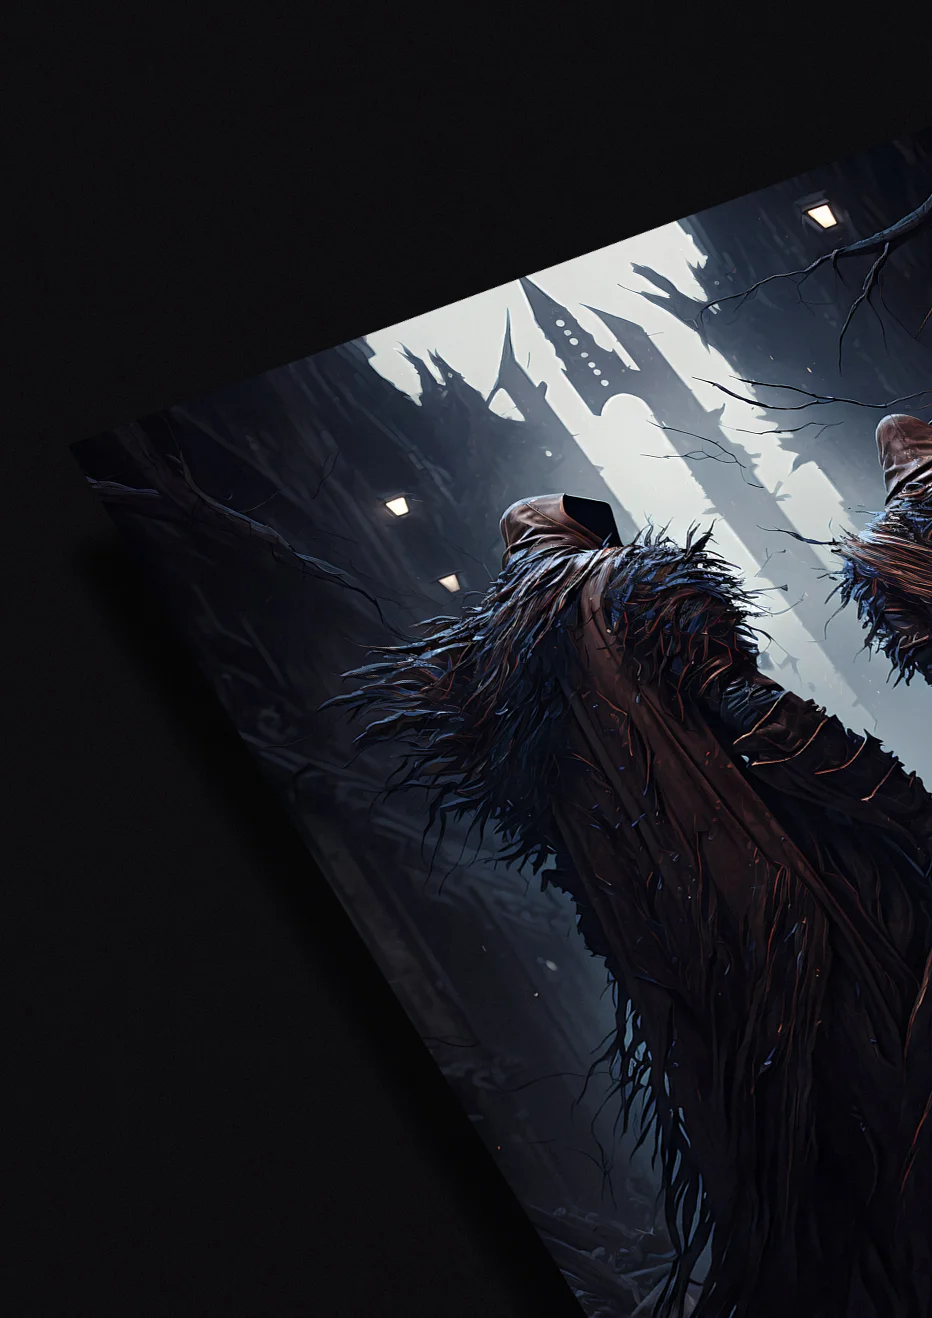 Artwork depicting Grim Hunters in ethereal pursuit amidst ruins and mysterious attire, exploring a haunting narrative.